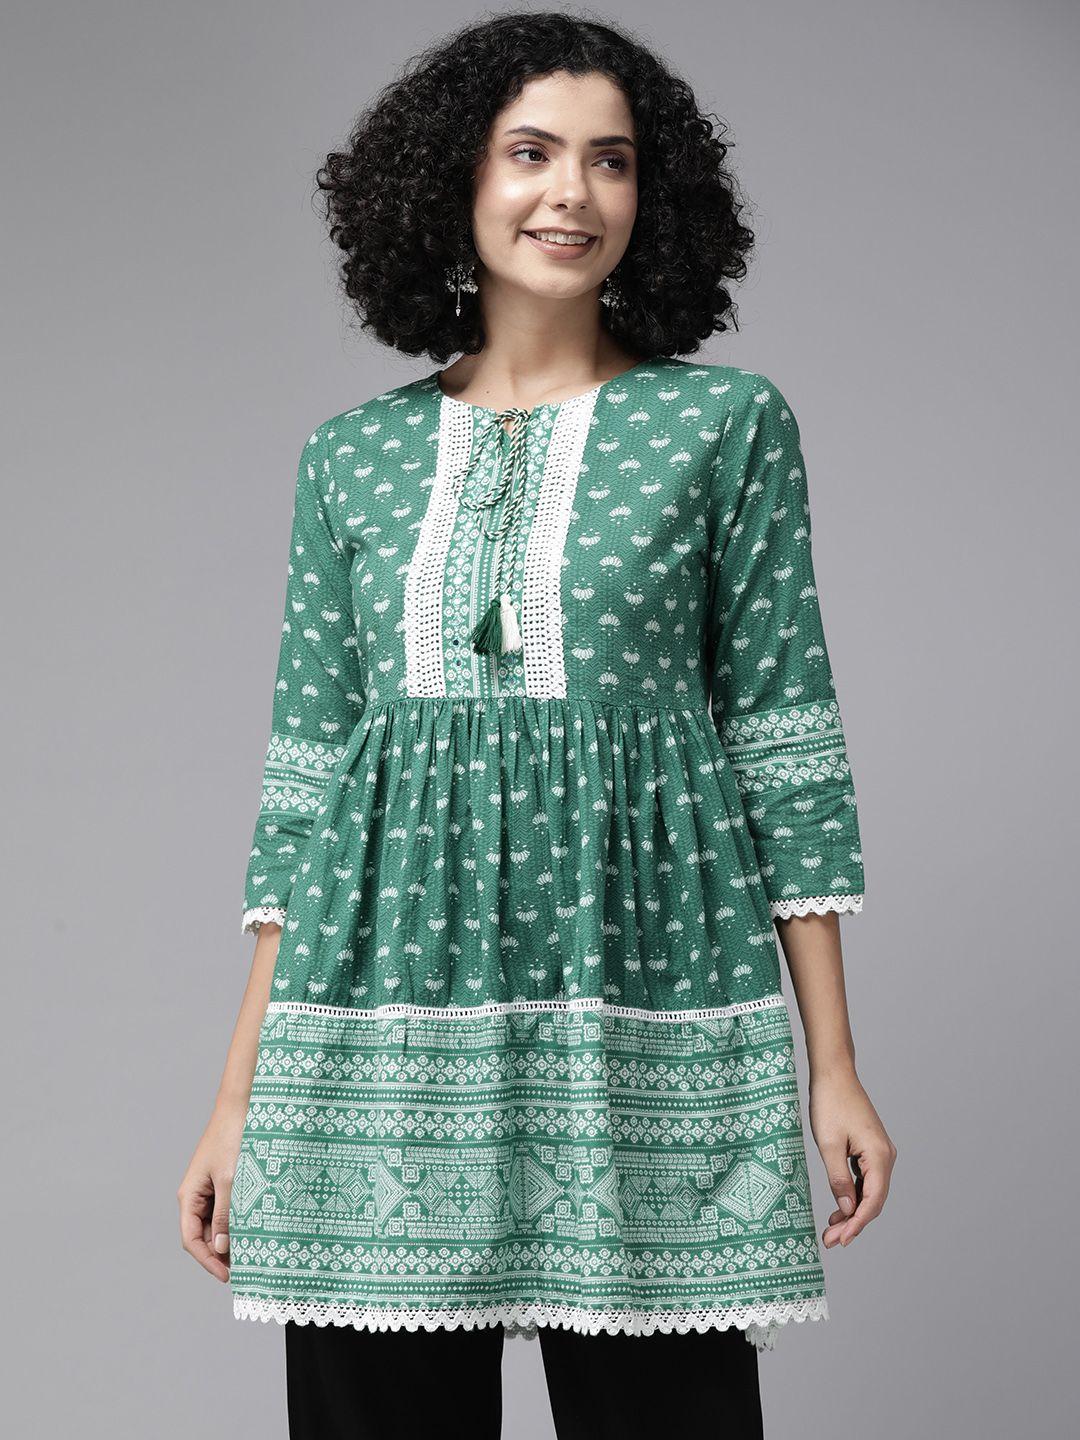 amirah s printed pure cotton tunic with lace detail